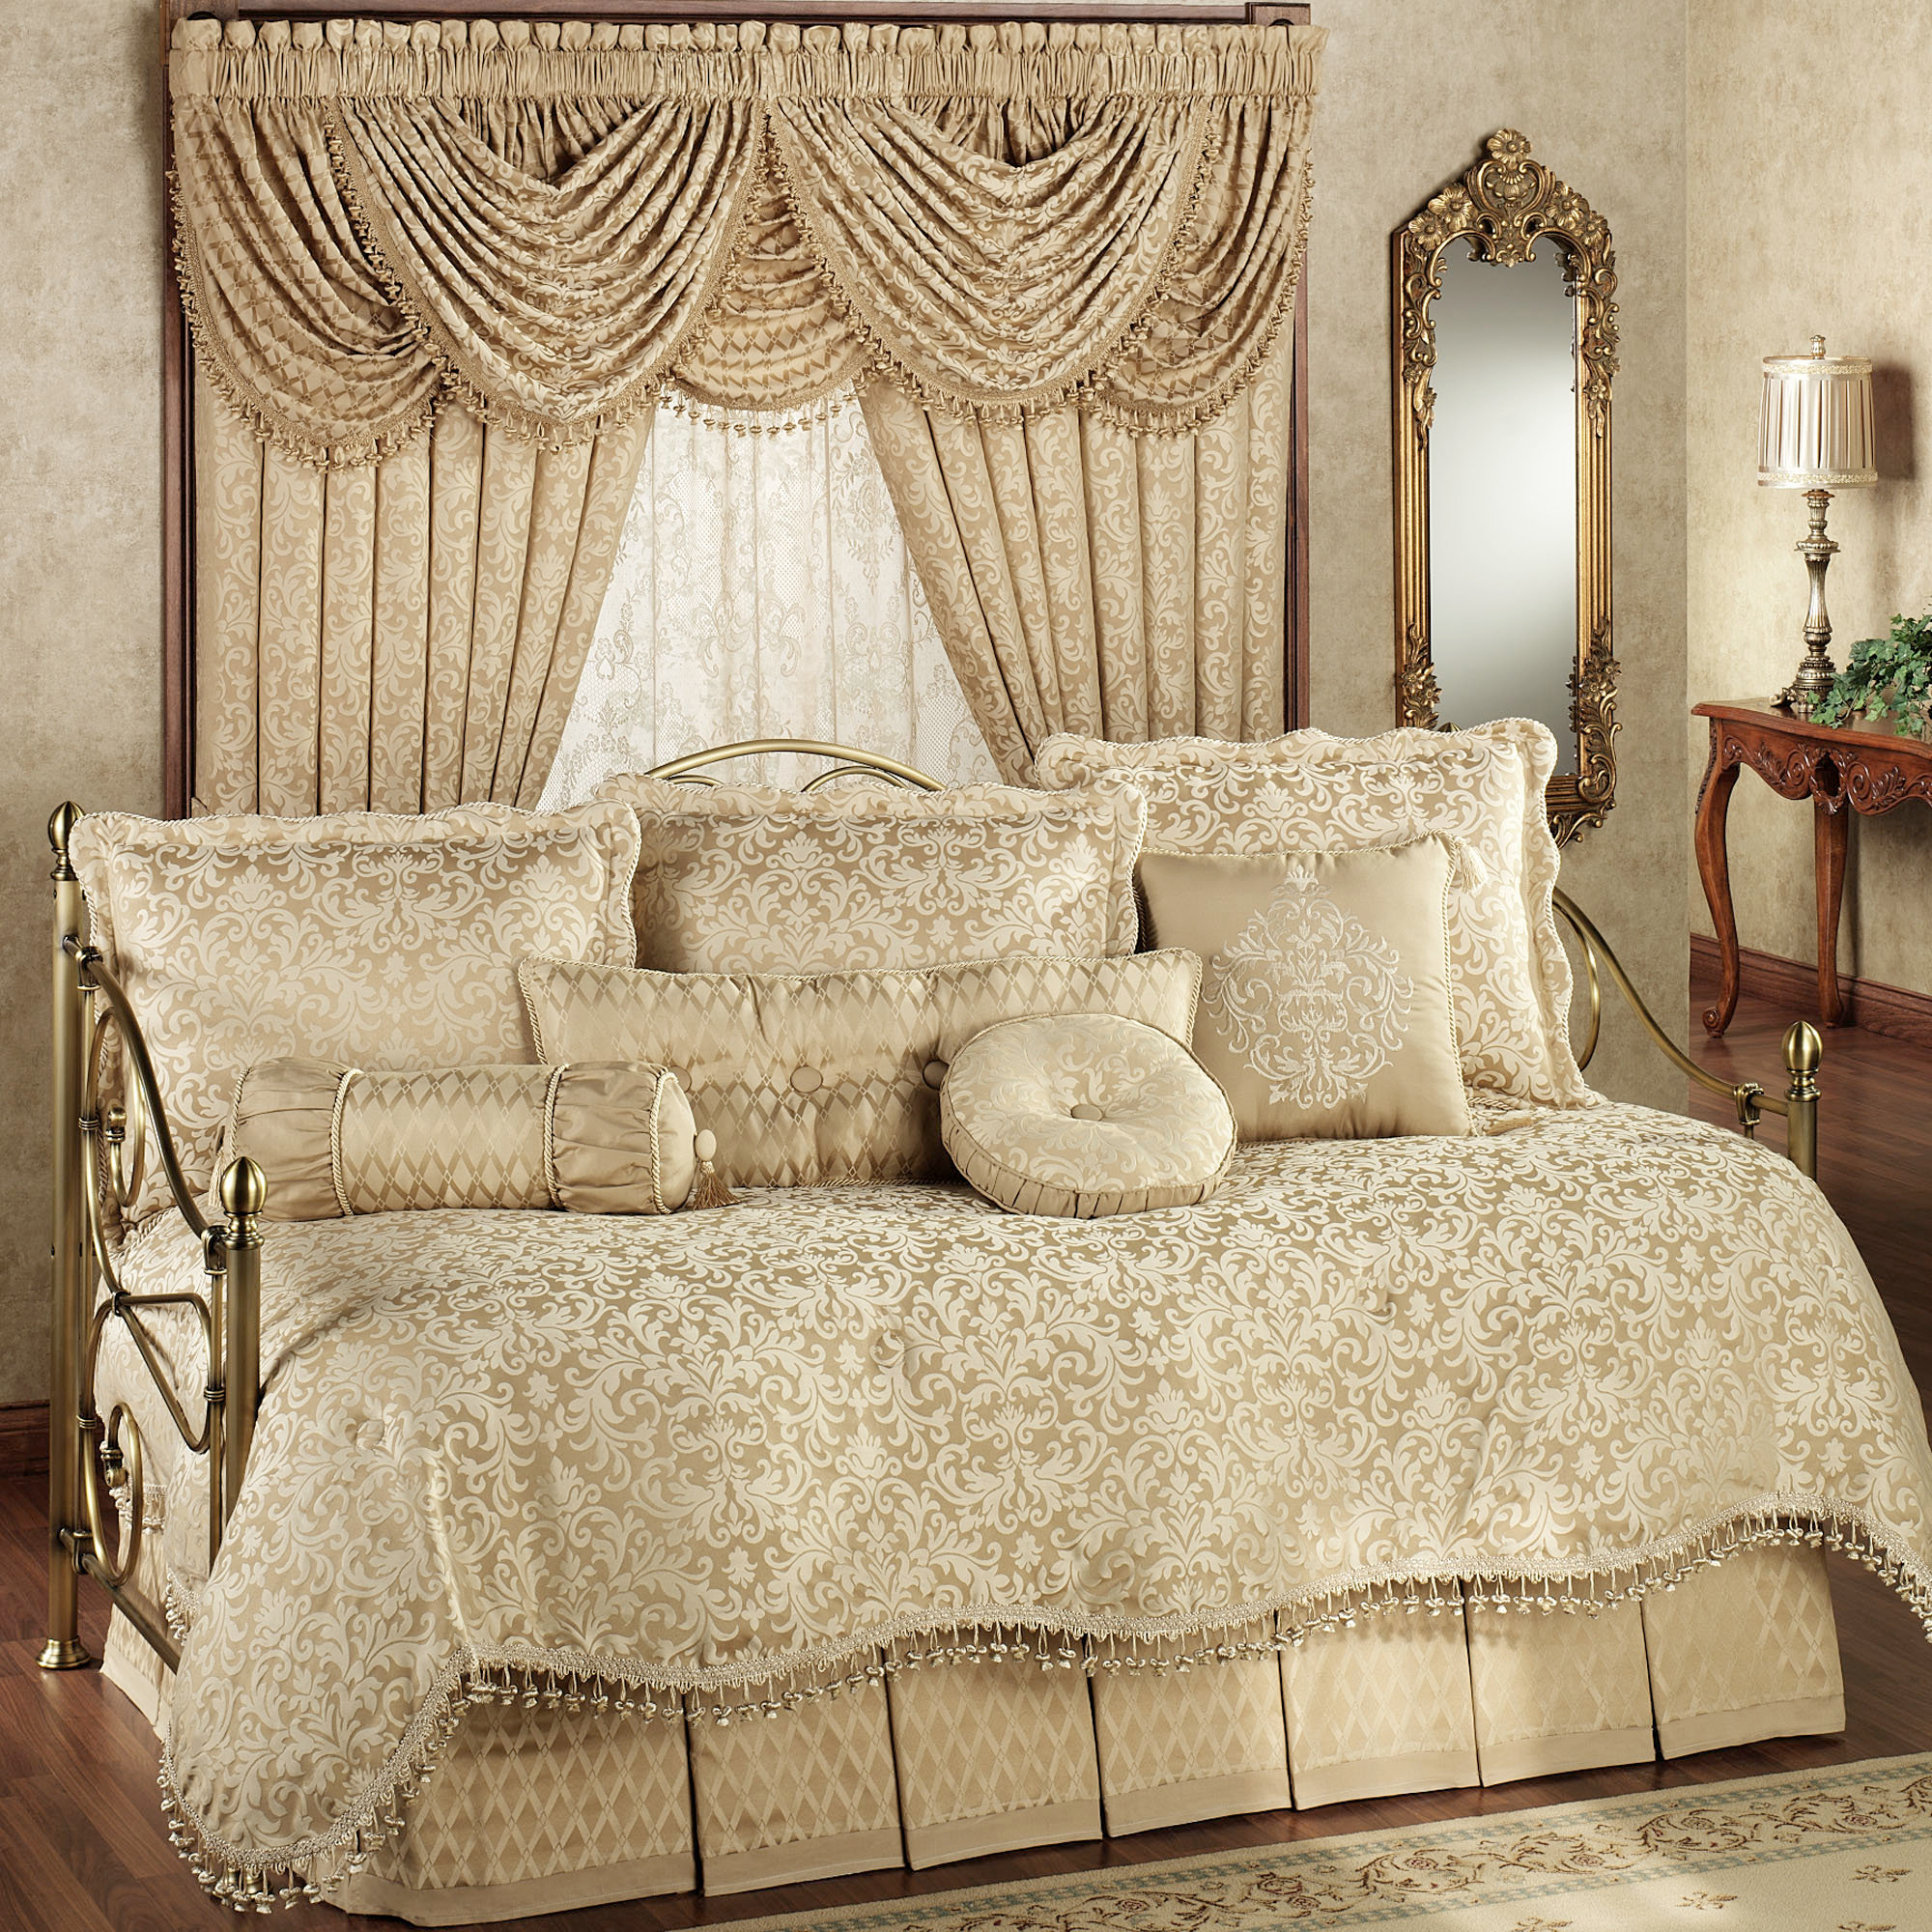 Daybed bed sets